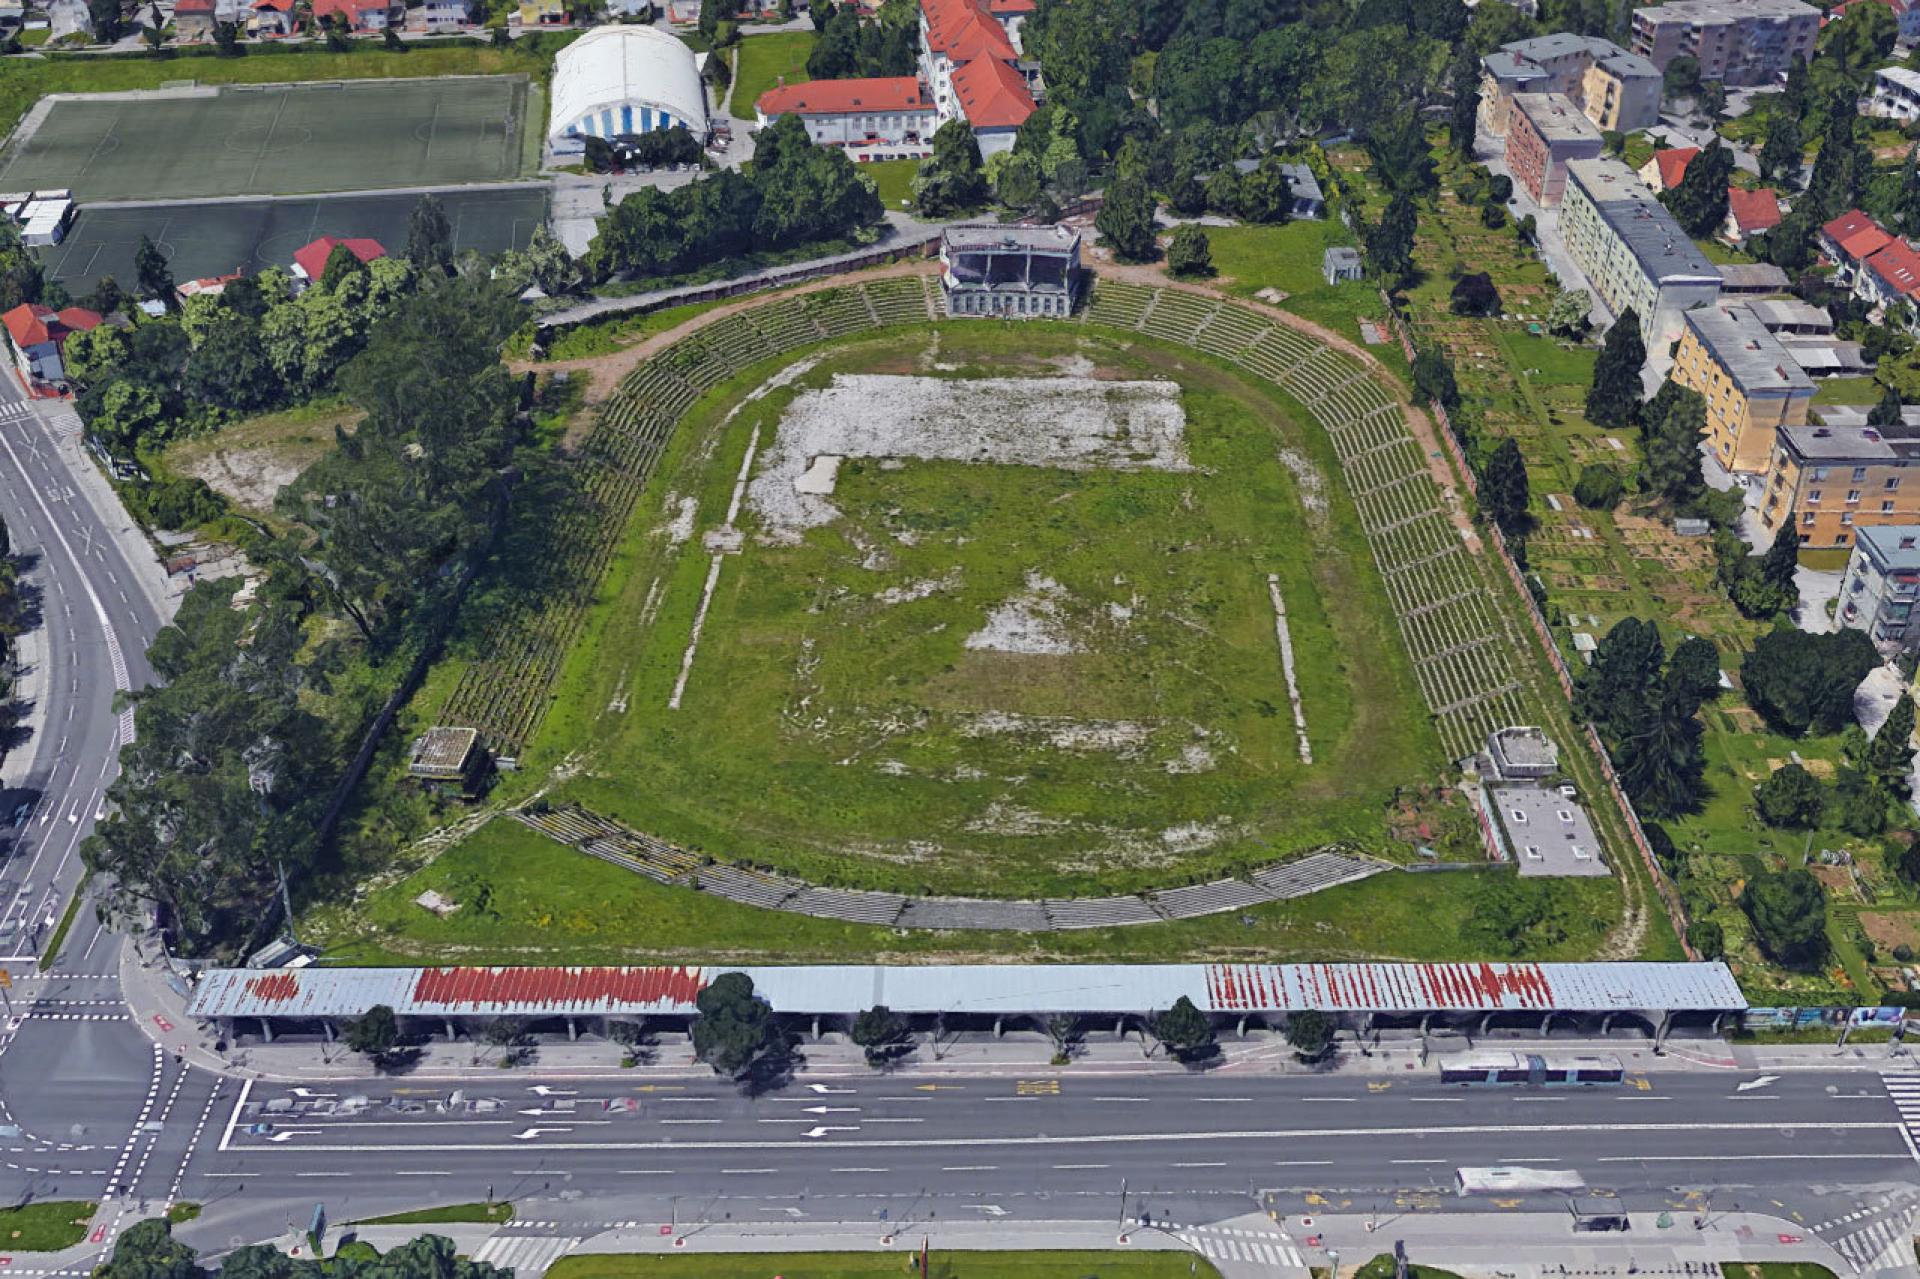 Construction of the stadium for the Roman Catholic youth sport association Orel began in 1925, but political and financial difficulties meant that it was not completed until 1935. | Photo via Outsider